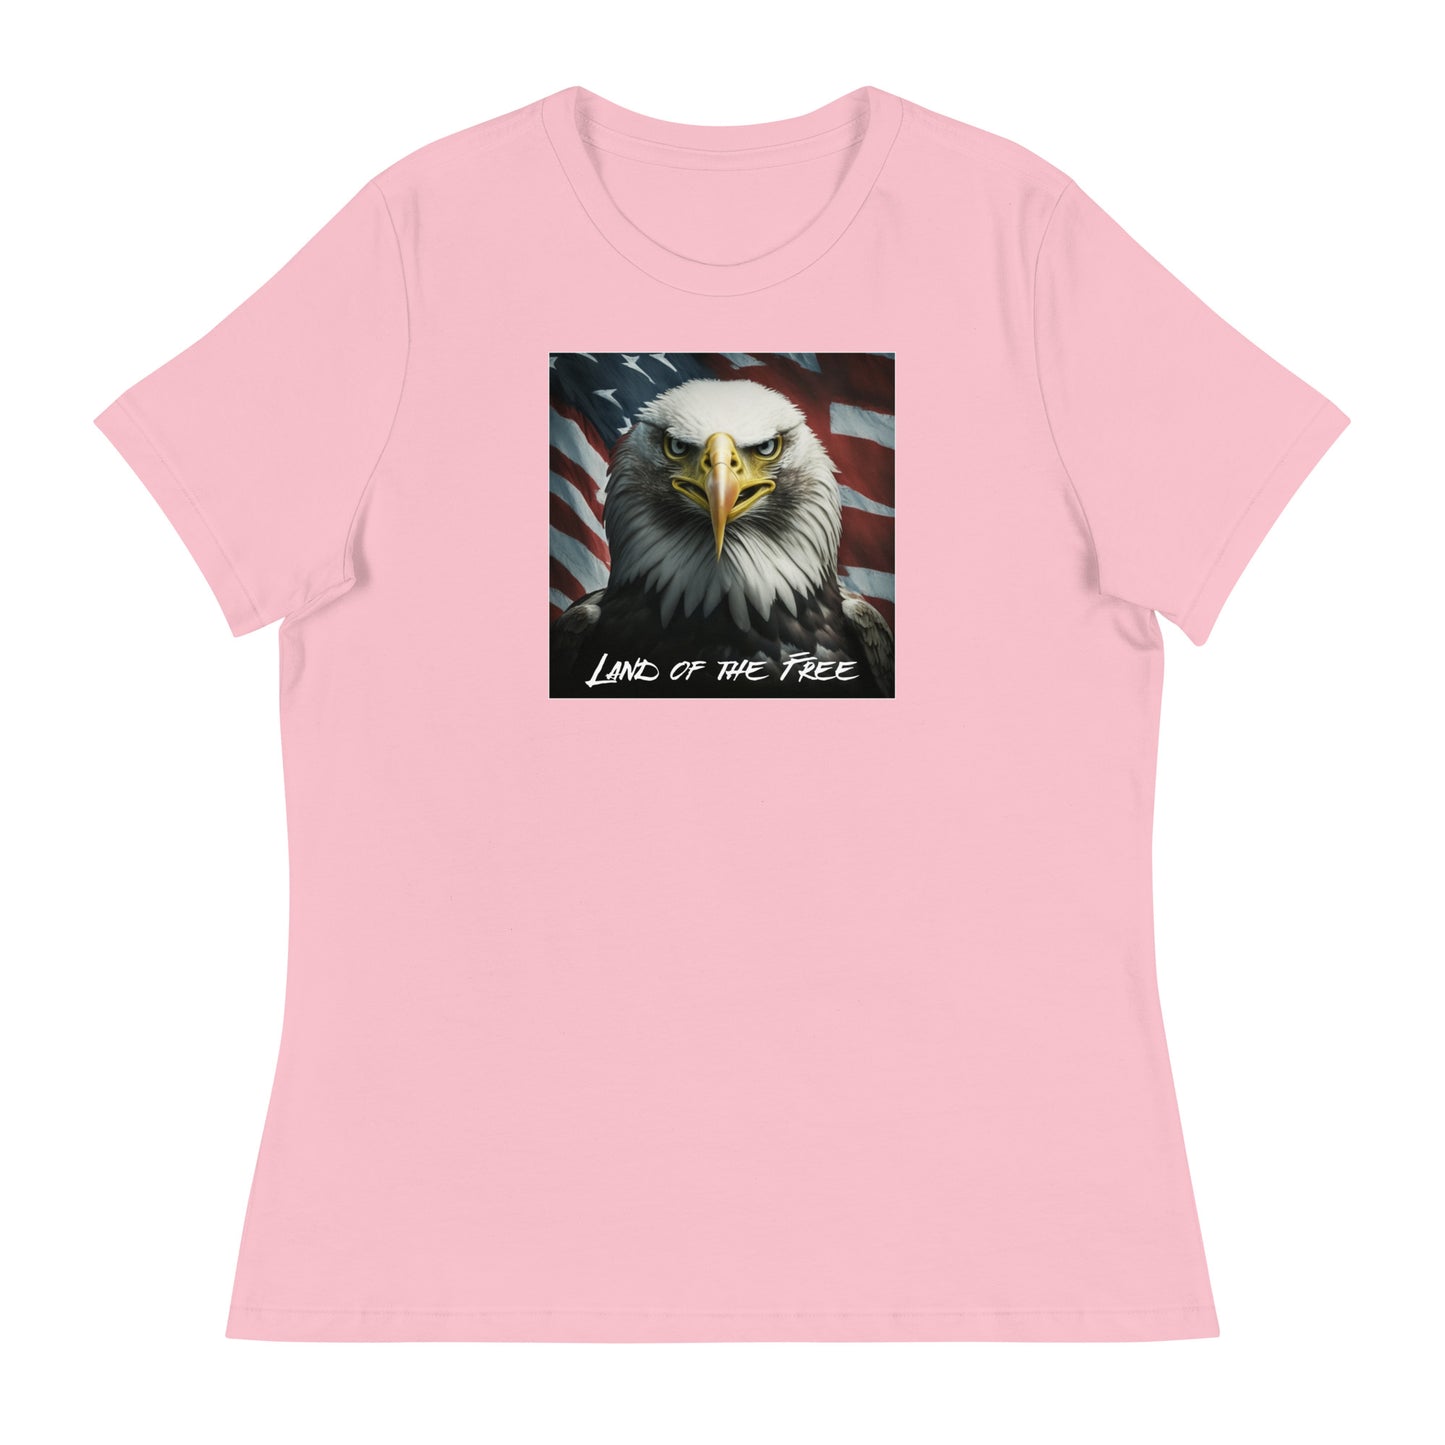 Land of the Free Graphic Women's T-Shirt Pink